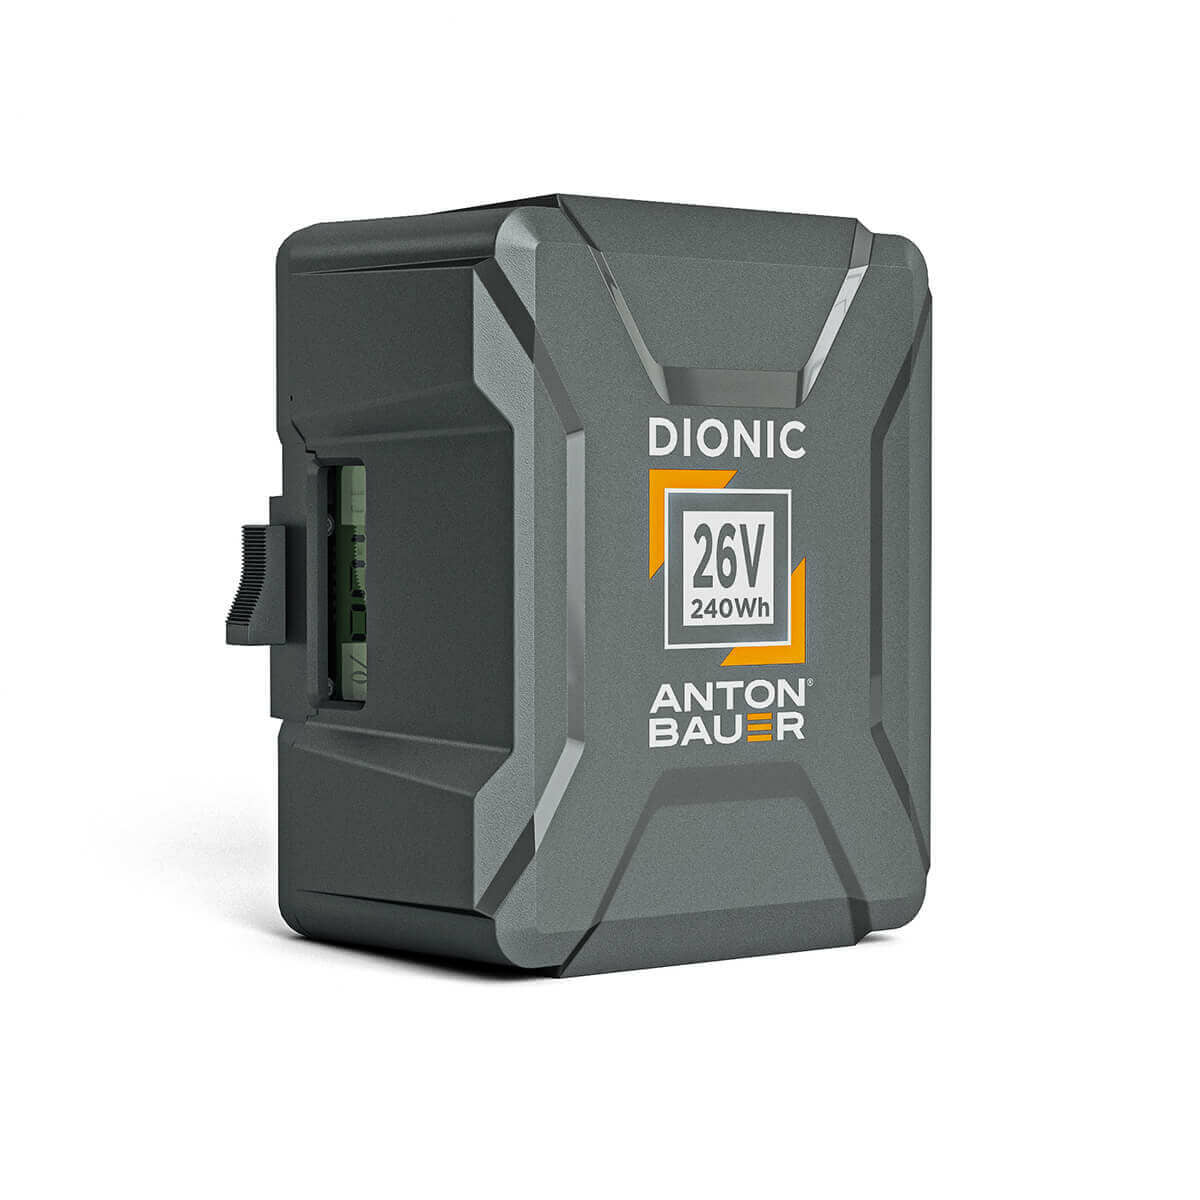 Anton/Bauer Dionic 26V, 240Wh B-mount battery 8675-0178